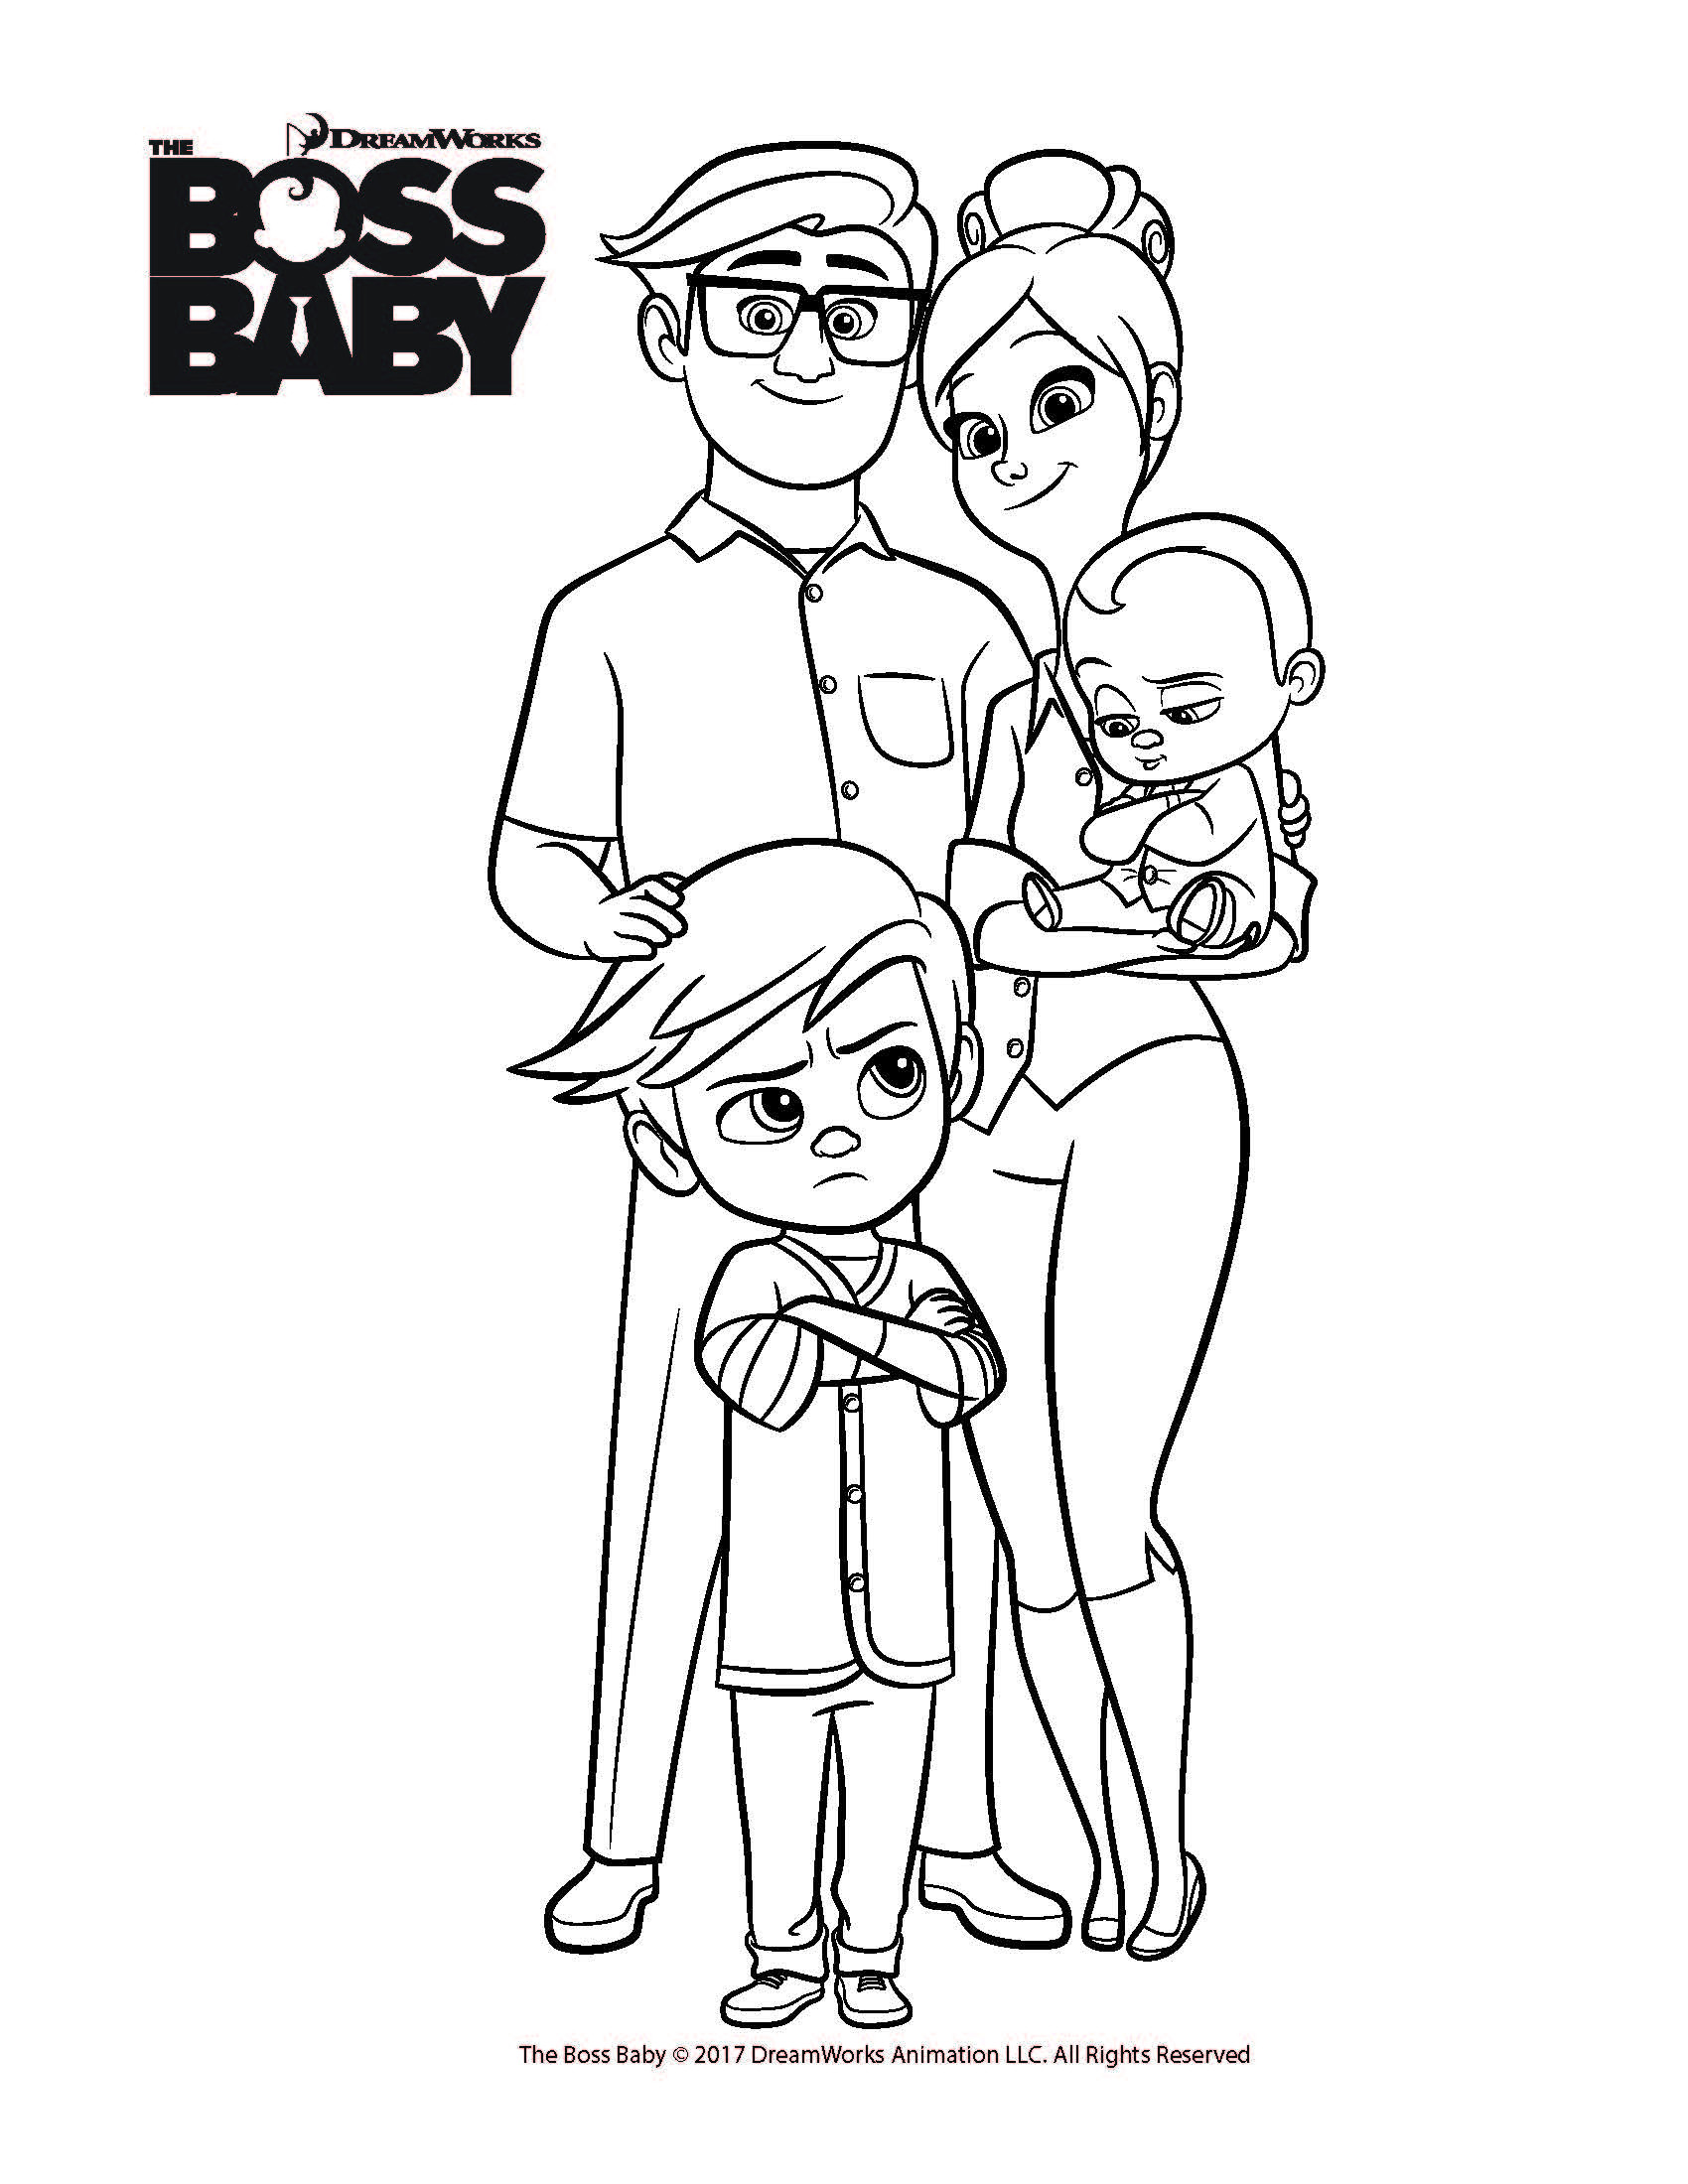 Boss Baby Coloring Pages
 Free coloring printables for The Boss Baby from Dreamworks